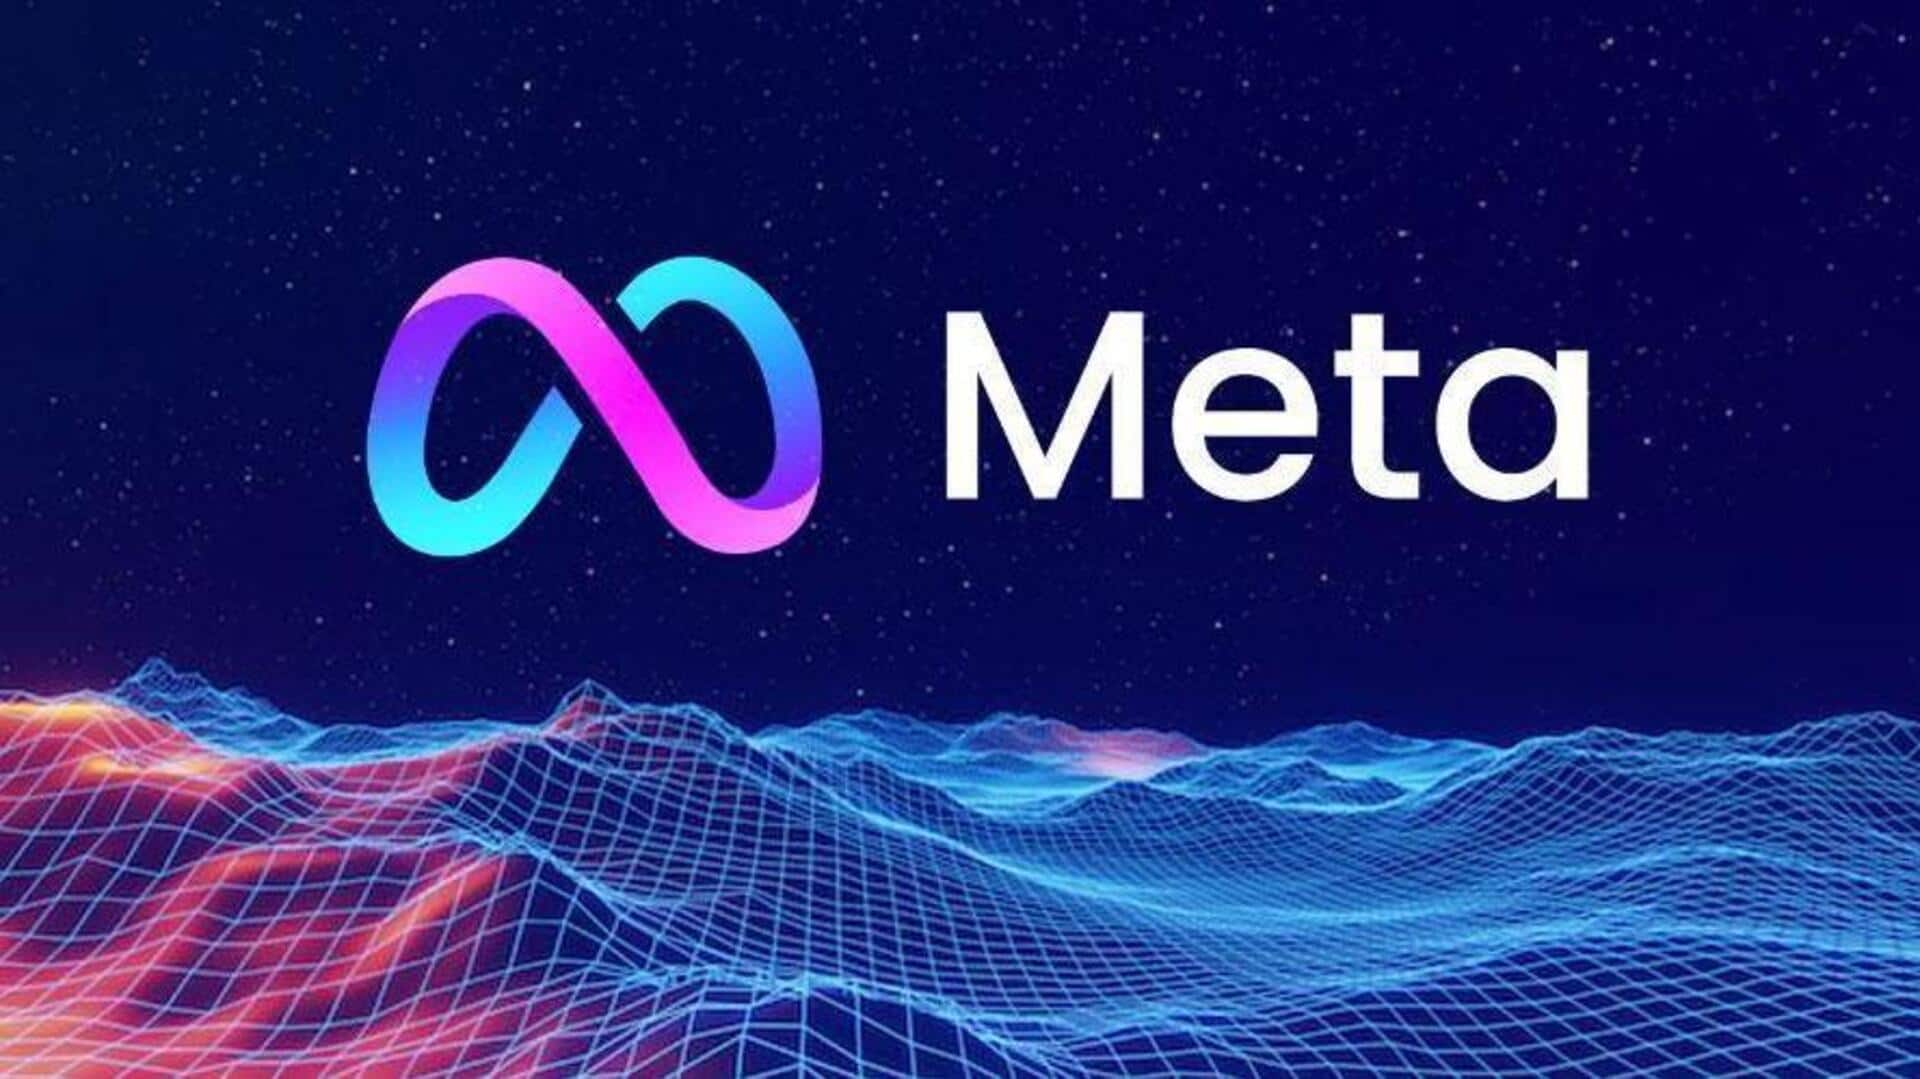 Meta accused of targeting under-13s, deceiving public about age-verification measures